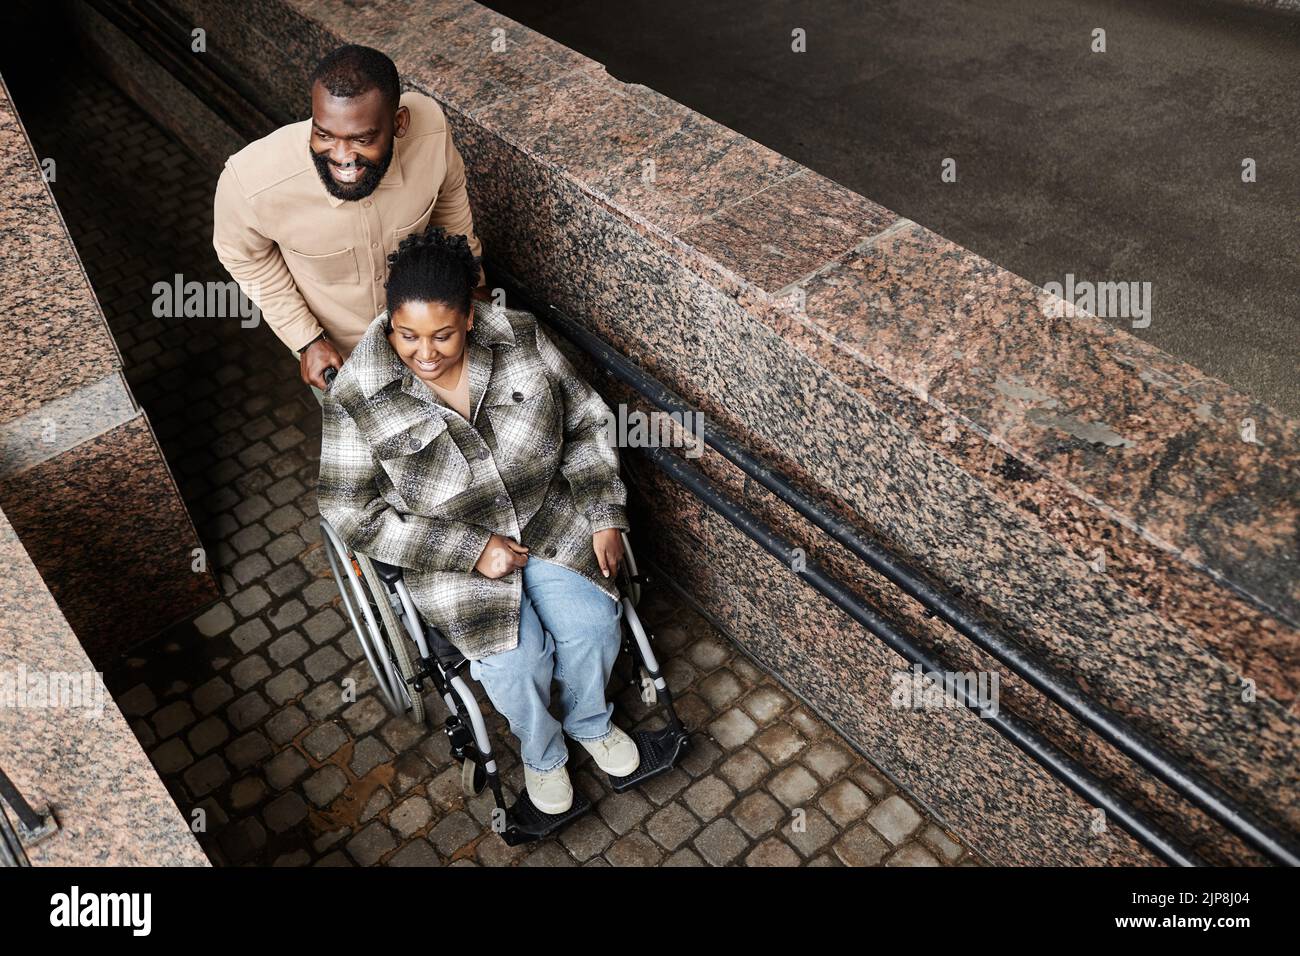 High angle portrait of black man assisting wife in wheelchair going down ramp in city, copy space Stock Photo